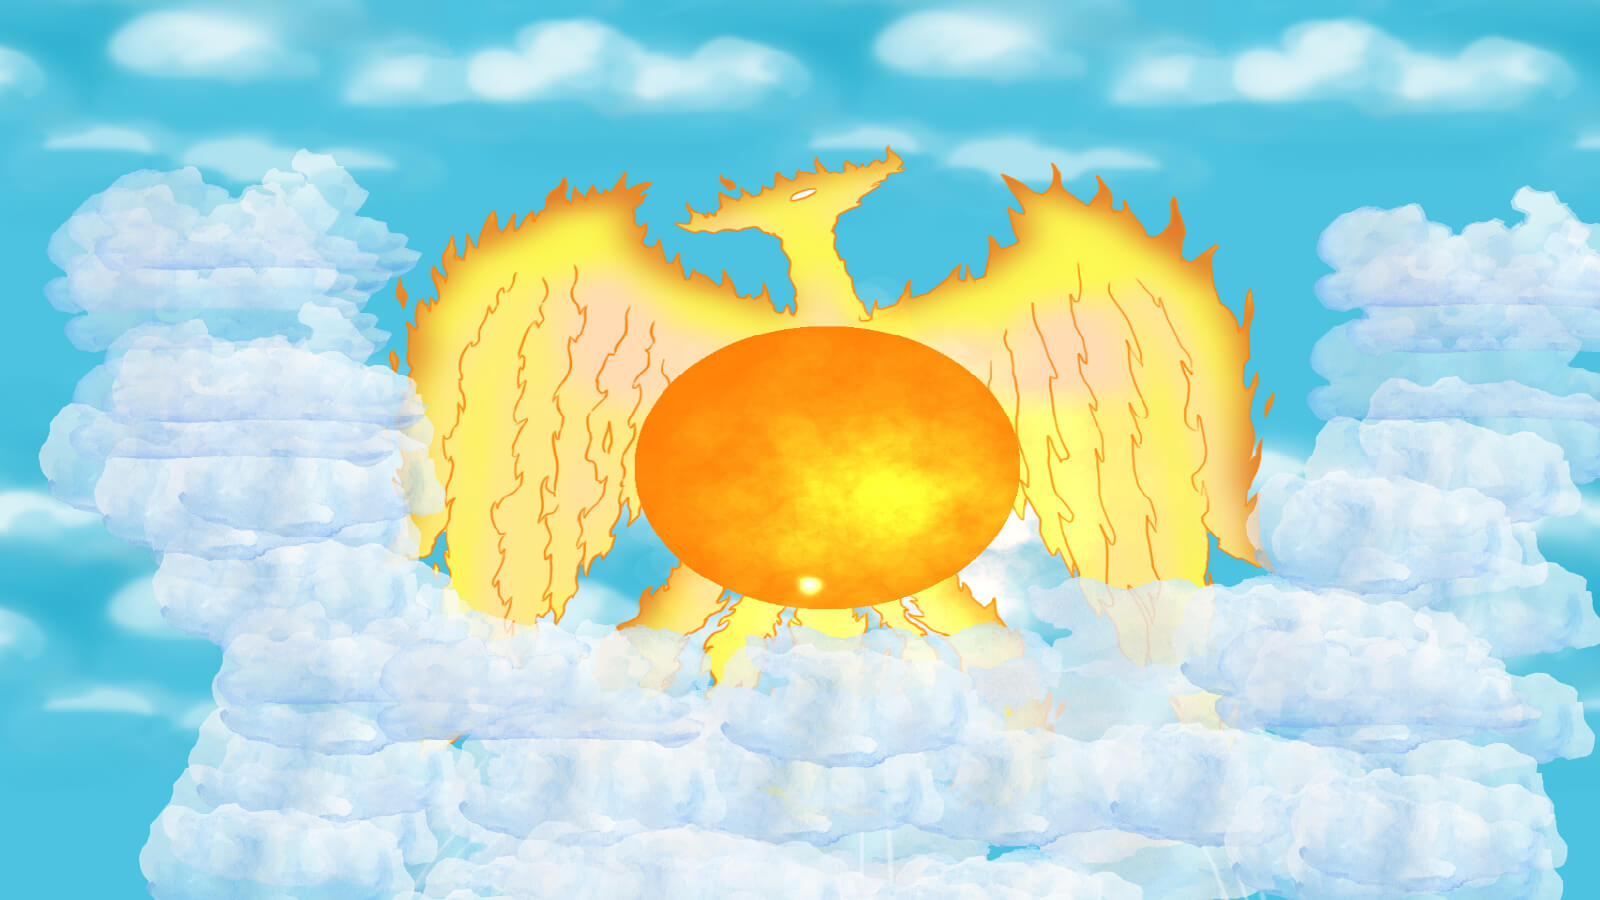 A phoenix in the clouds with a large sun-like orb in front of it.